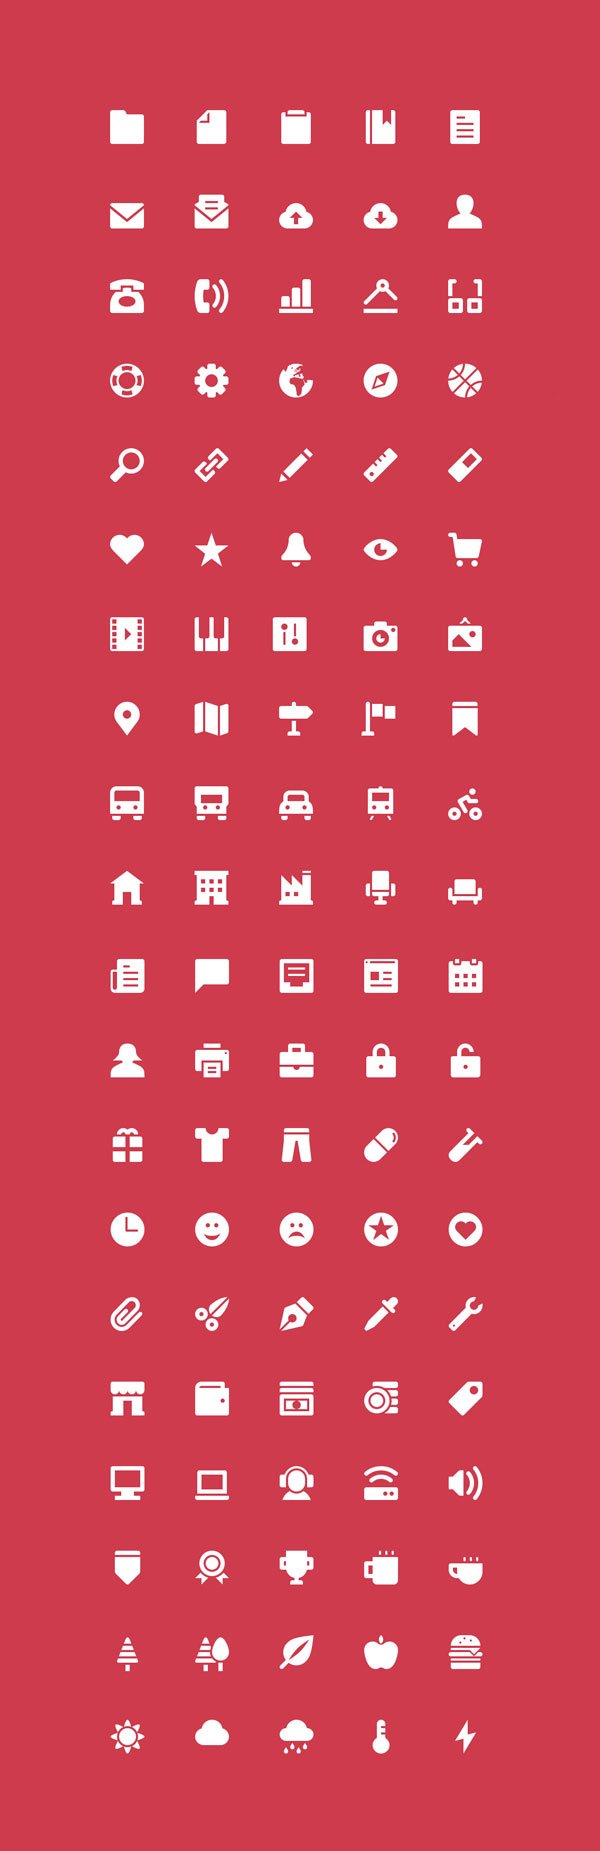 The Icons: 100 Free Icons